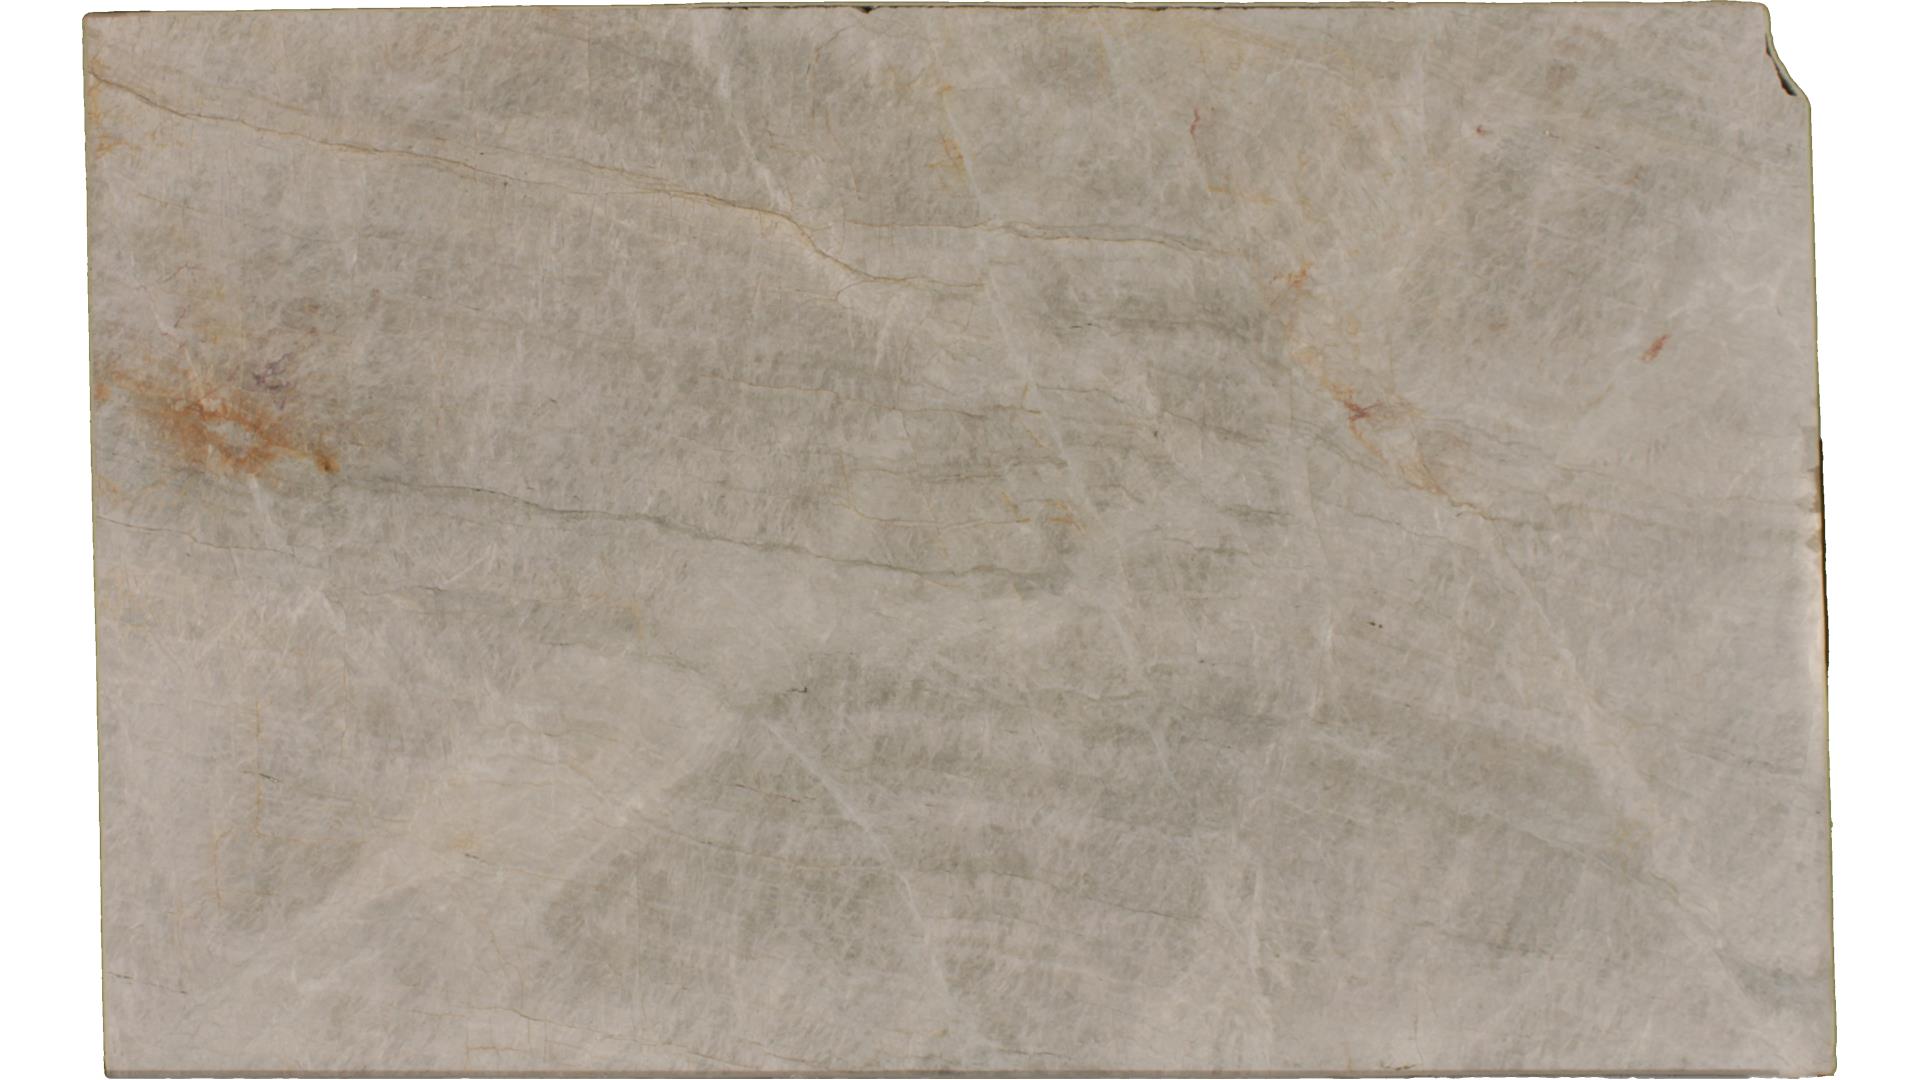 Madre Pearla Leathered Natural Stone Slabs